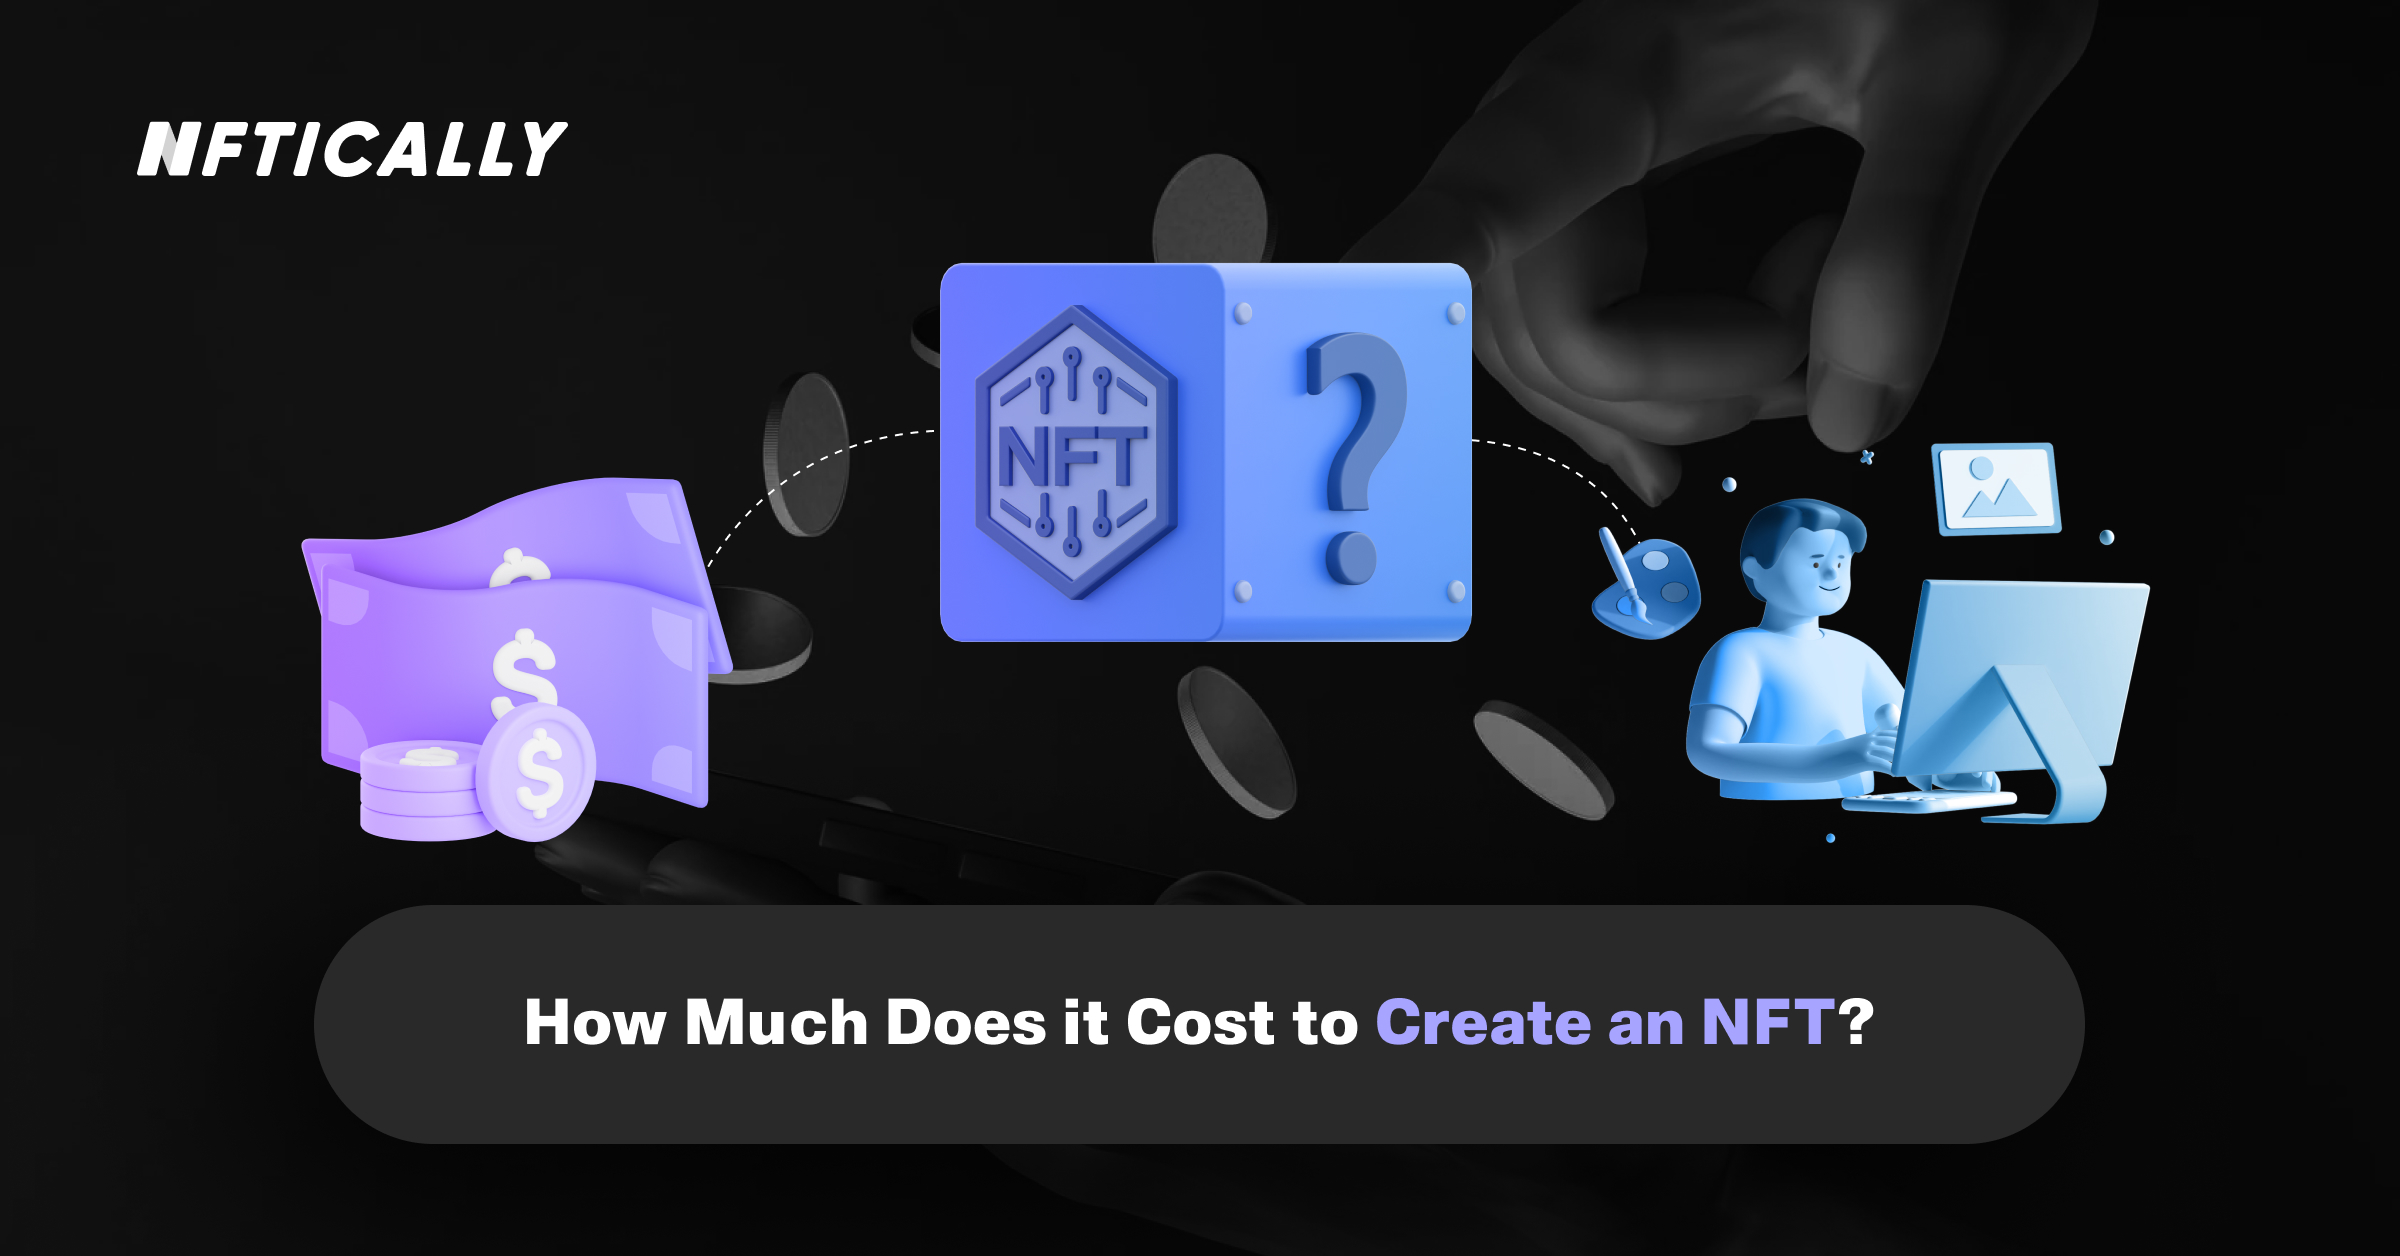 How Much Does it Cost to Create an NFT?